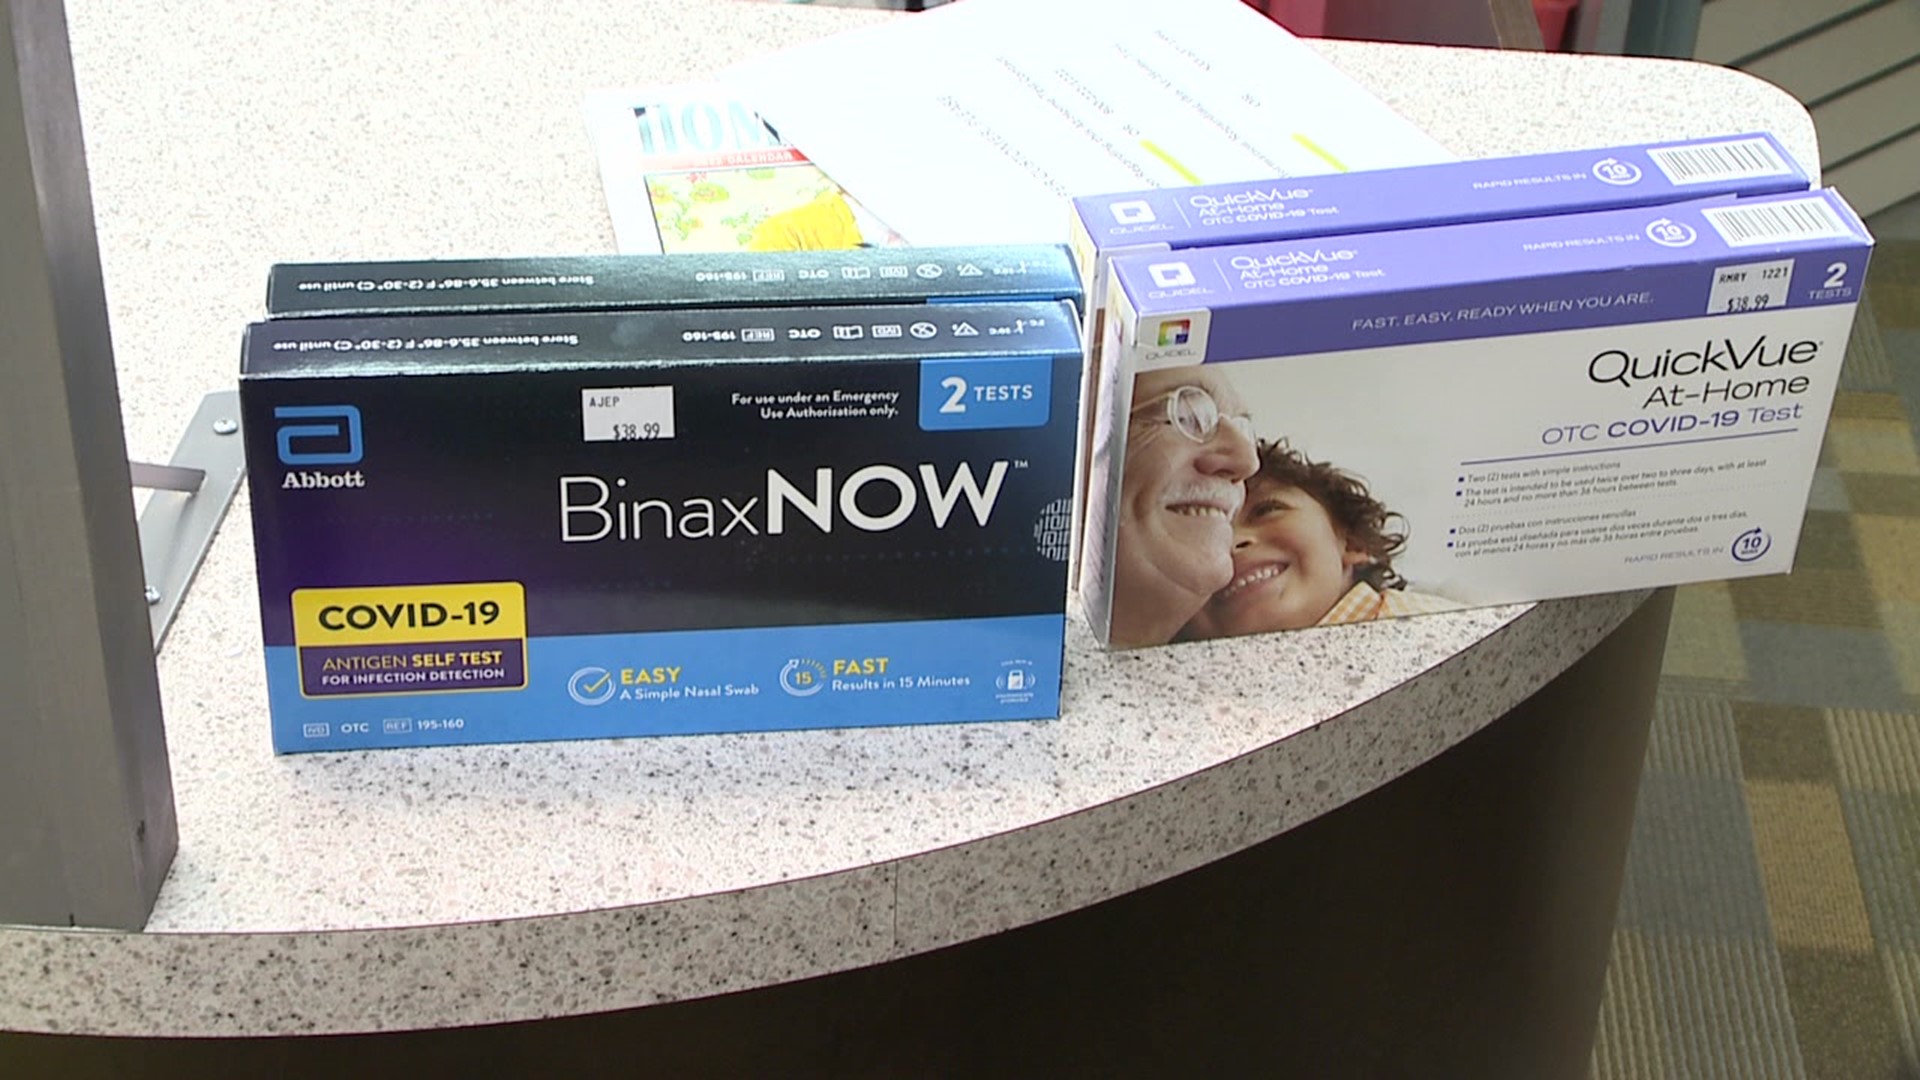 There is an increased demand for at-home, rapid tests ahead of the holidays. Newswatch 16's Amanda Eustice stopped by some local pharmacies to check their supply.